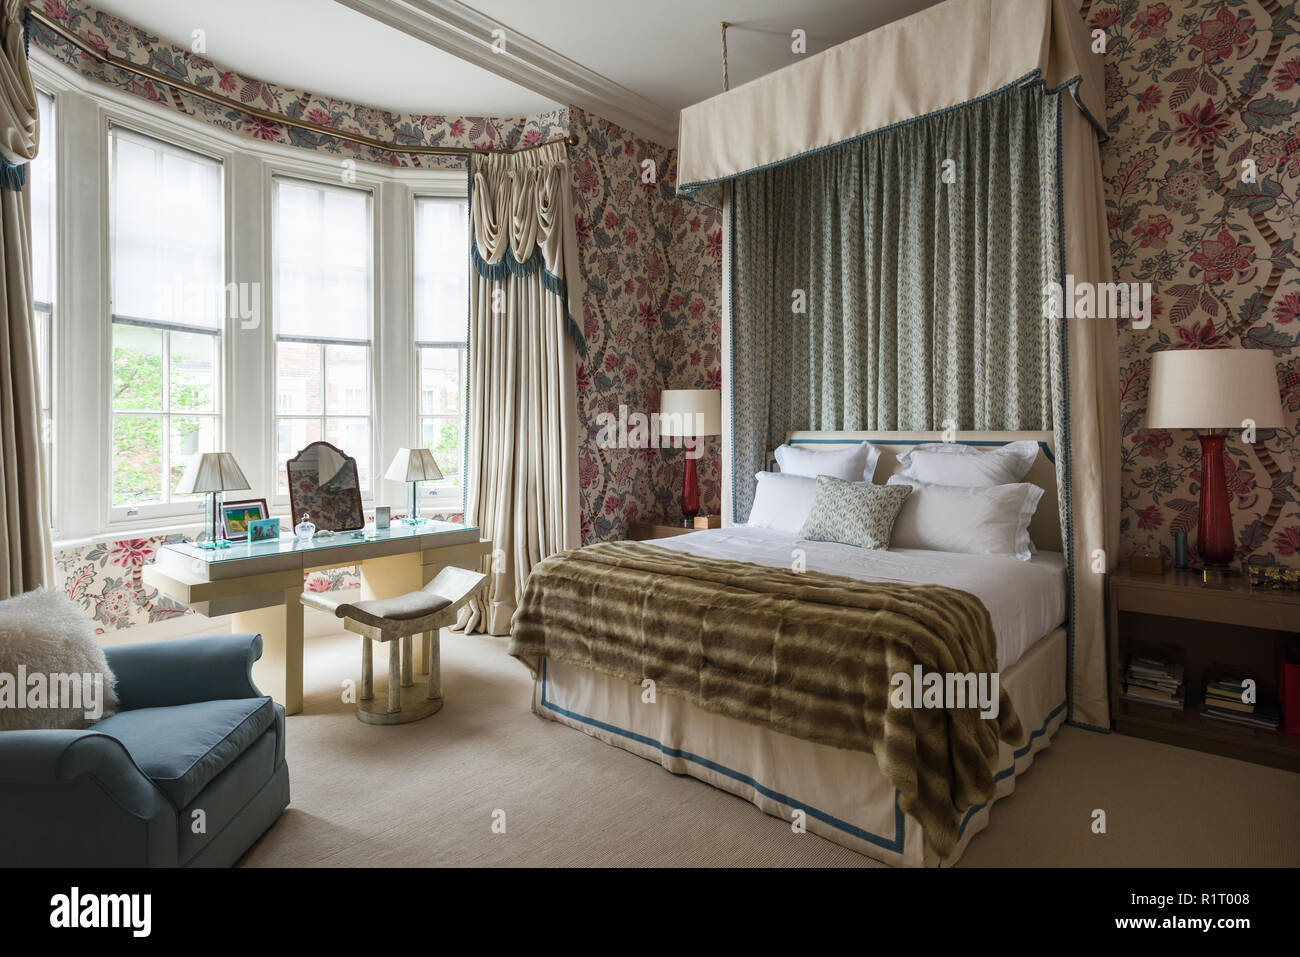 Edwardian bedroom with floral wallpaper Stock Photo